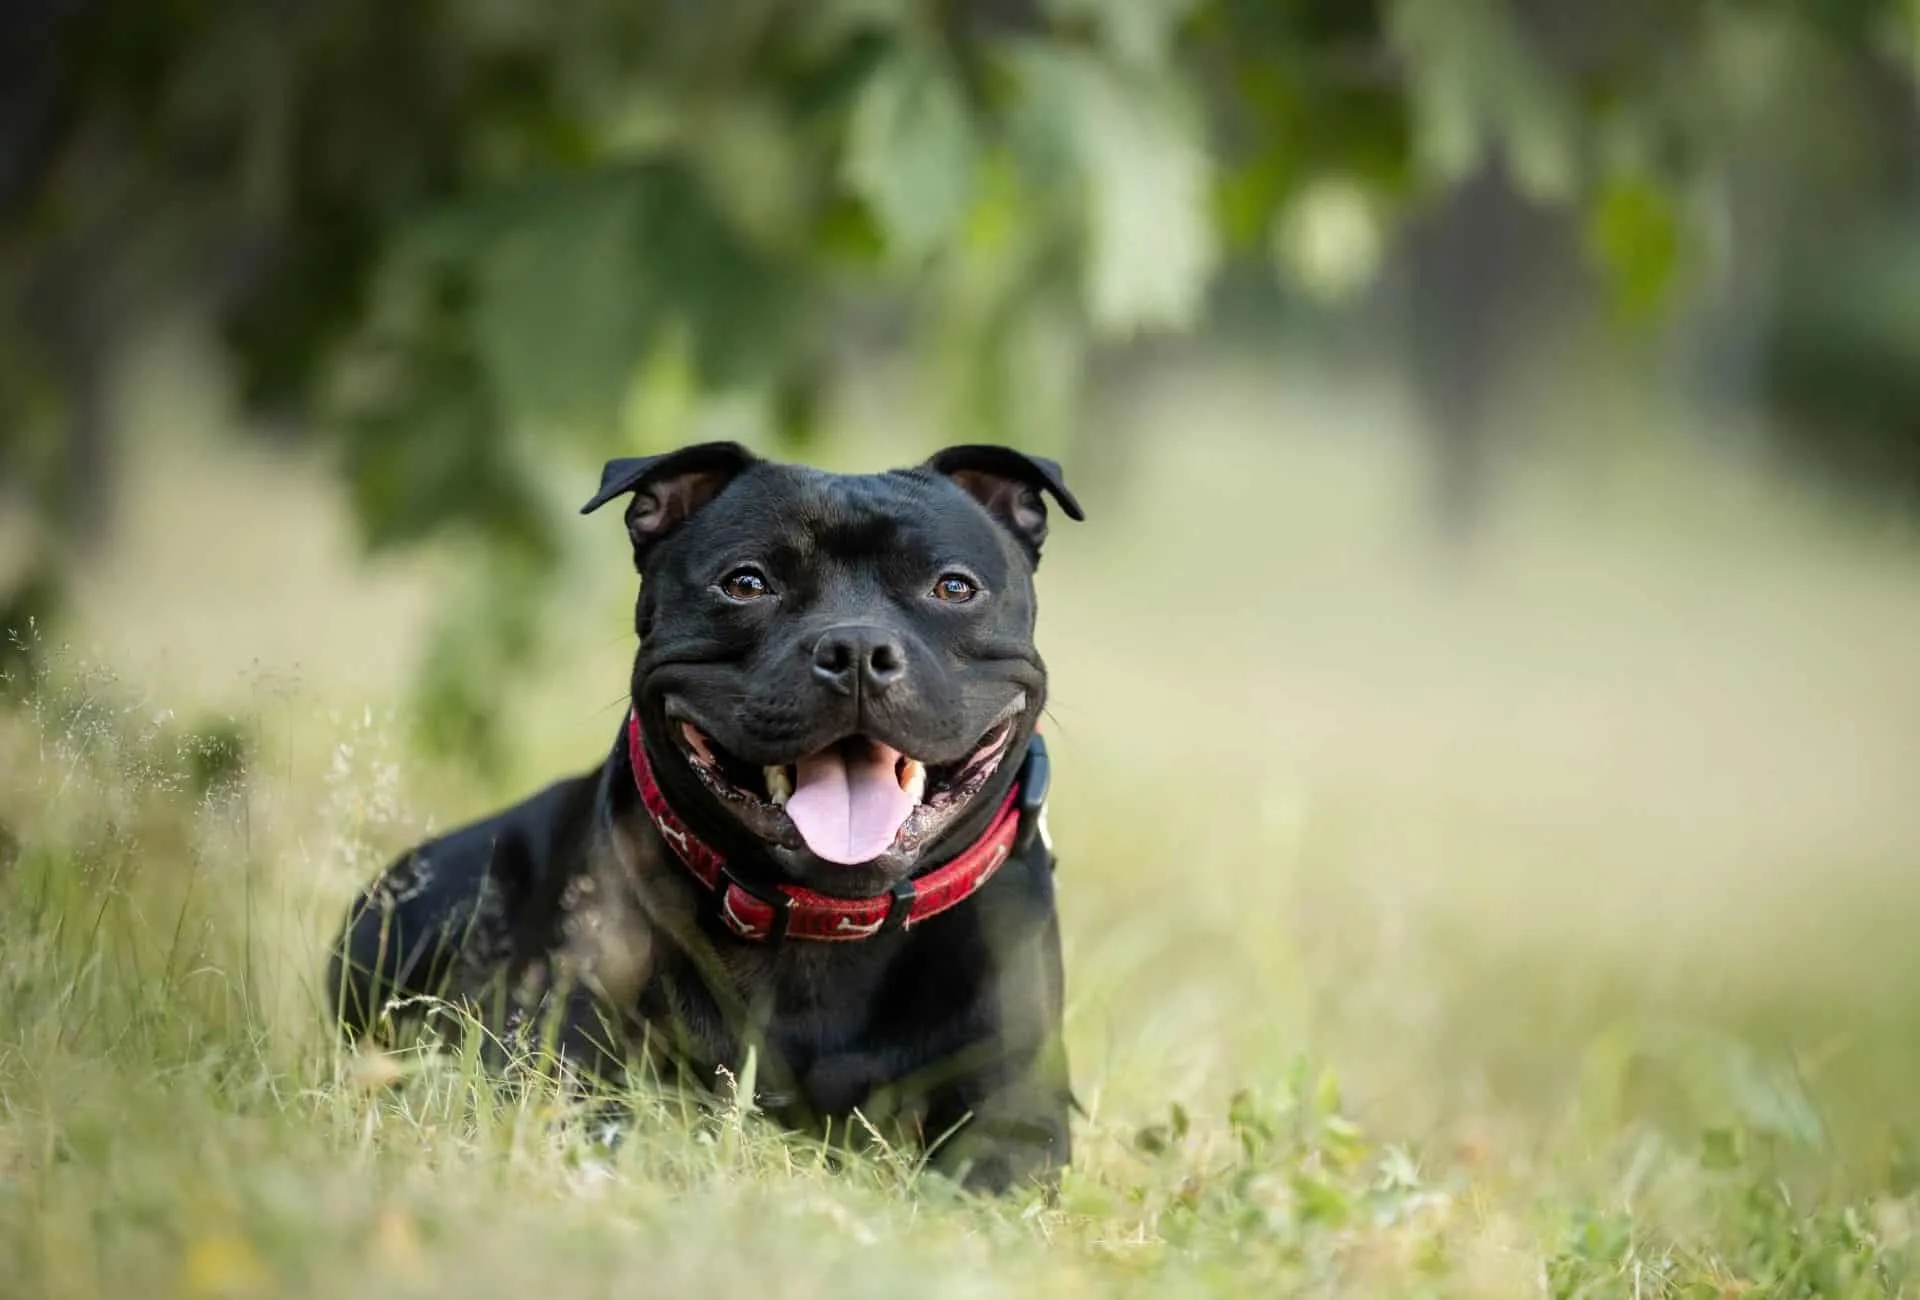 Staffordshire Bullterrier as best guard dog for first time dog owners.